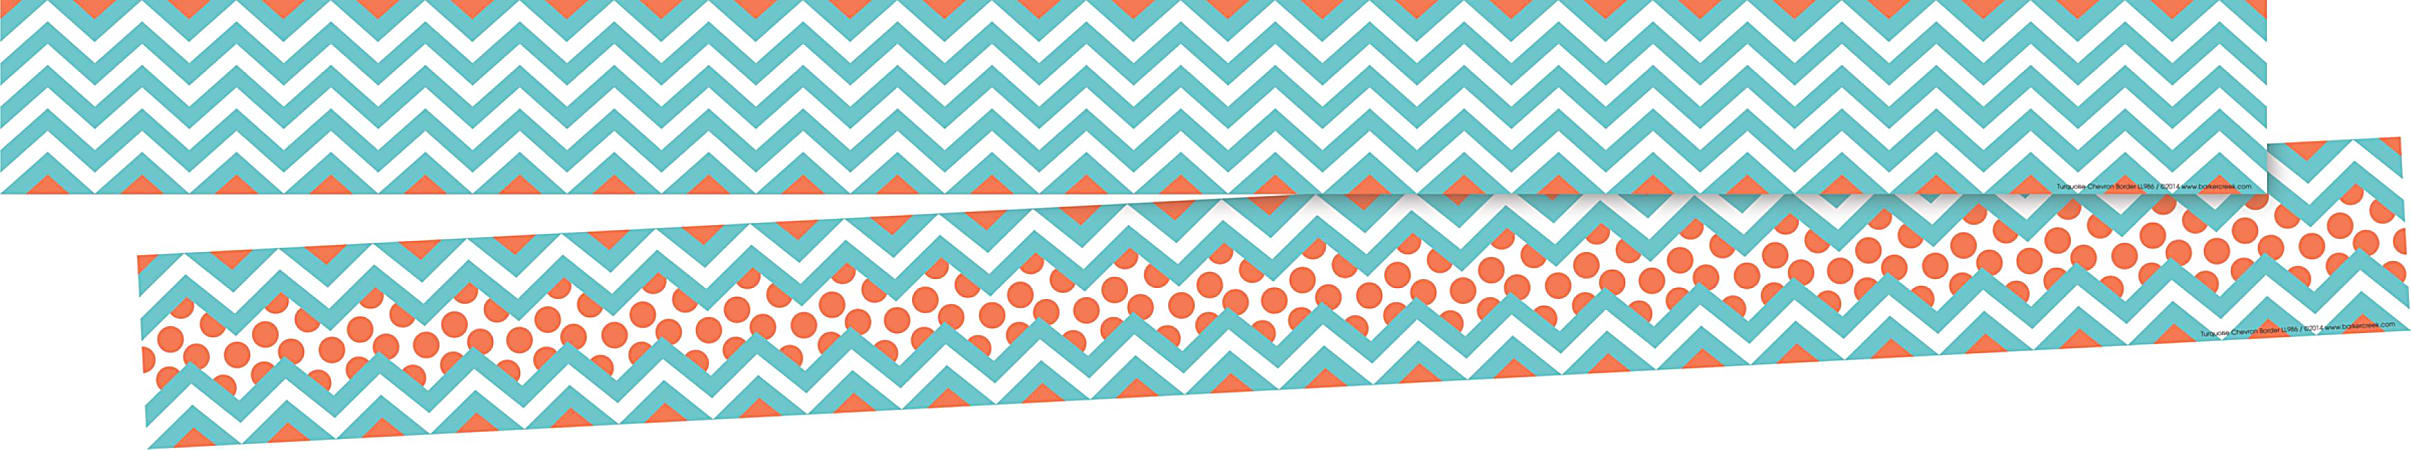 Barker Creek Double-Sided Straight-Edge Border Strips, 3" x 35", Chevron Turquoise, Pack Of 12